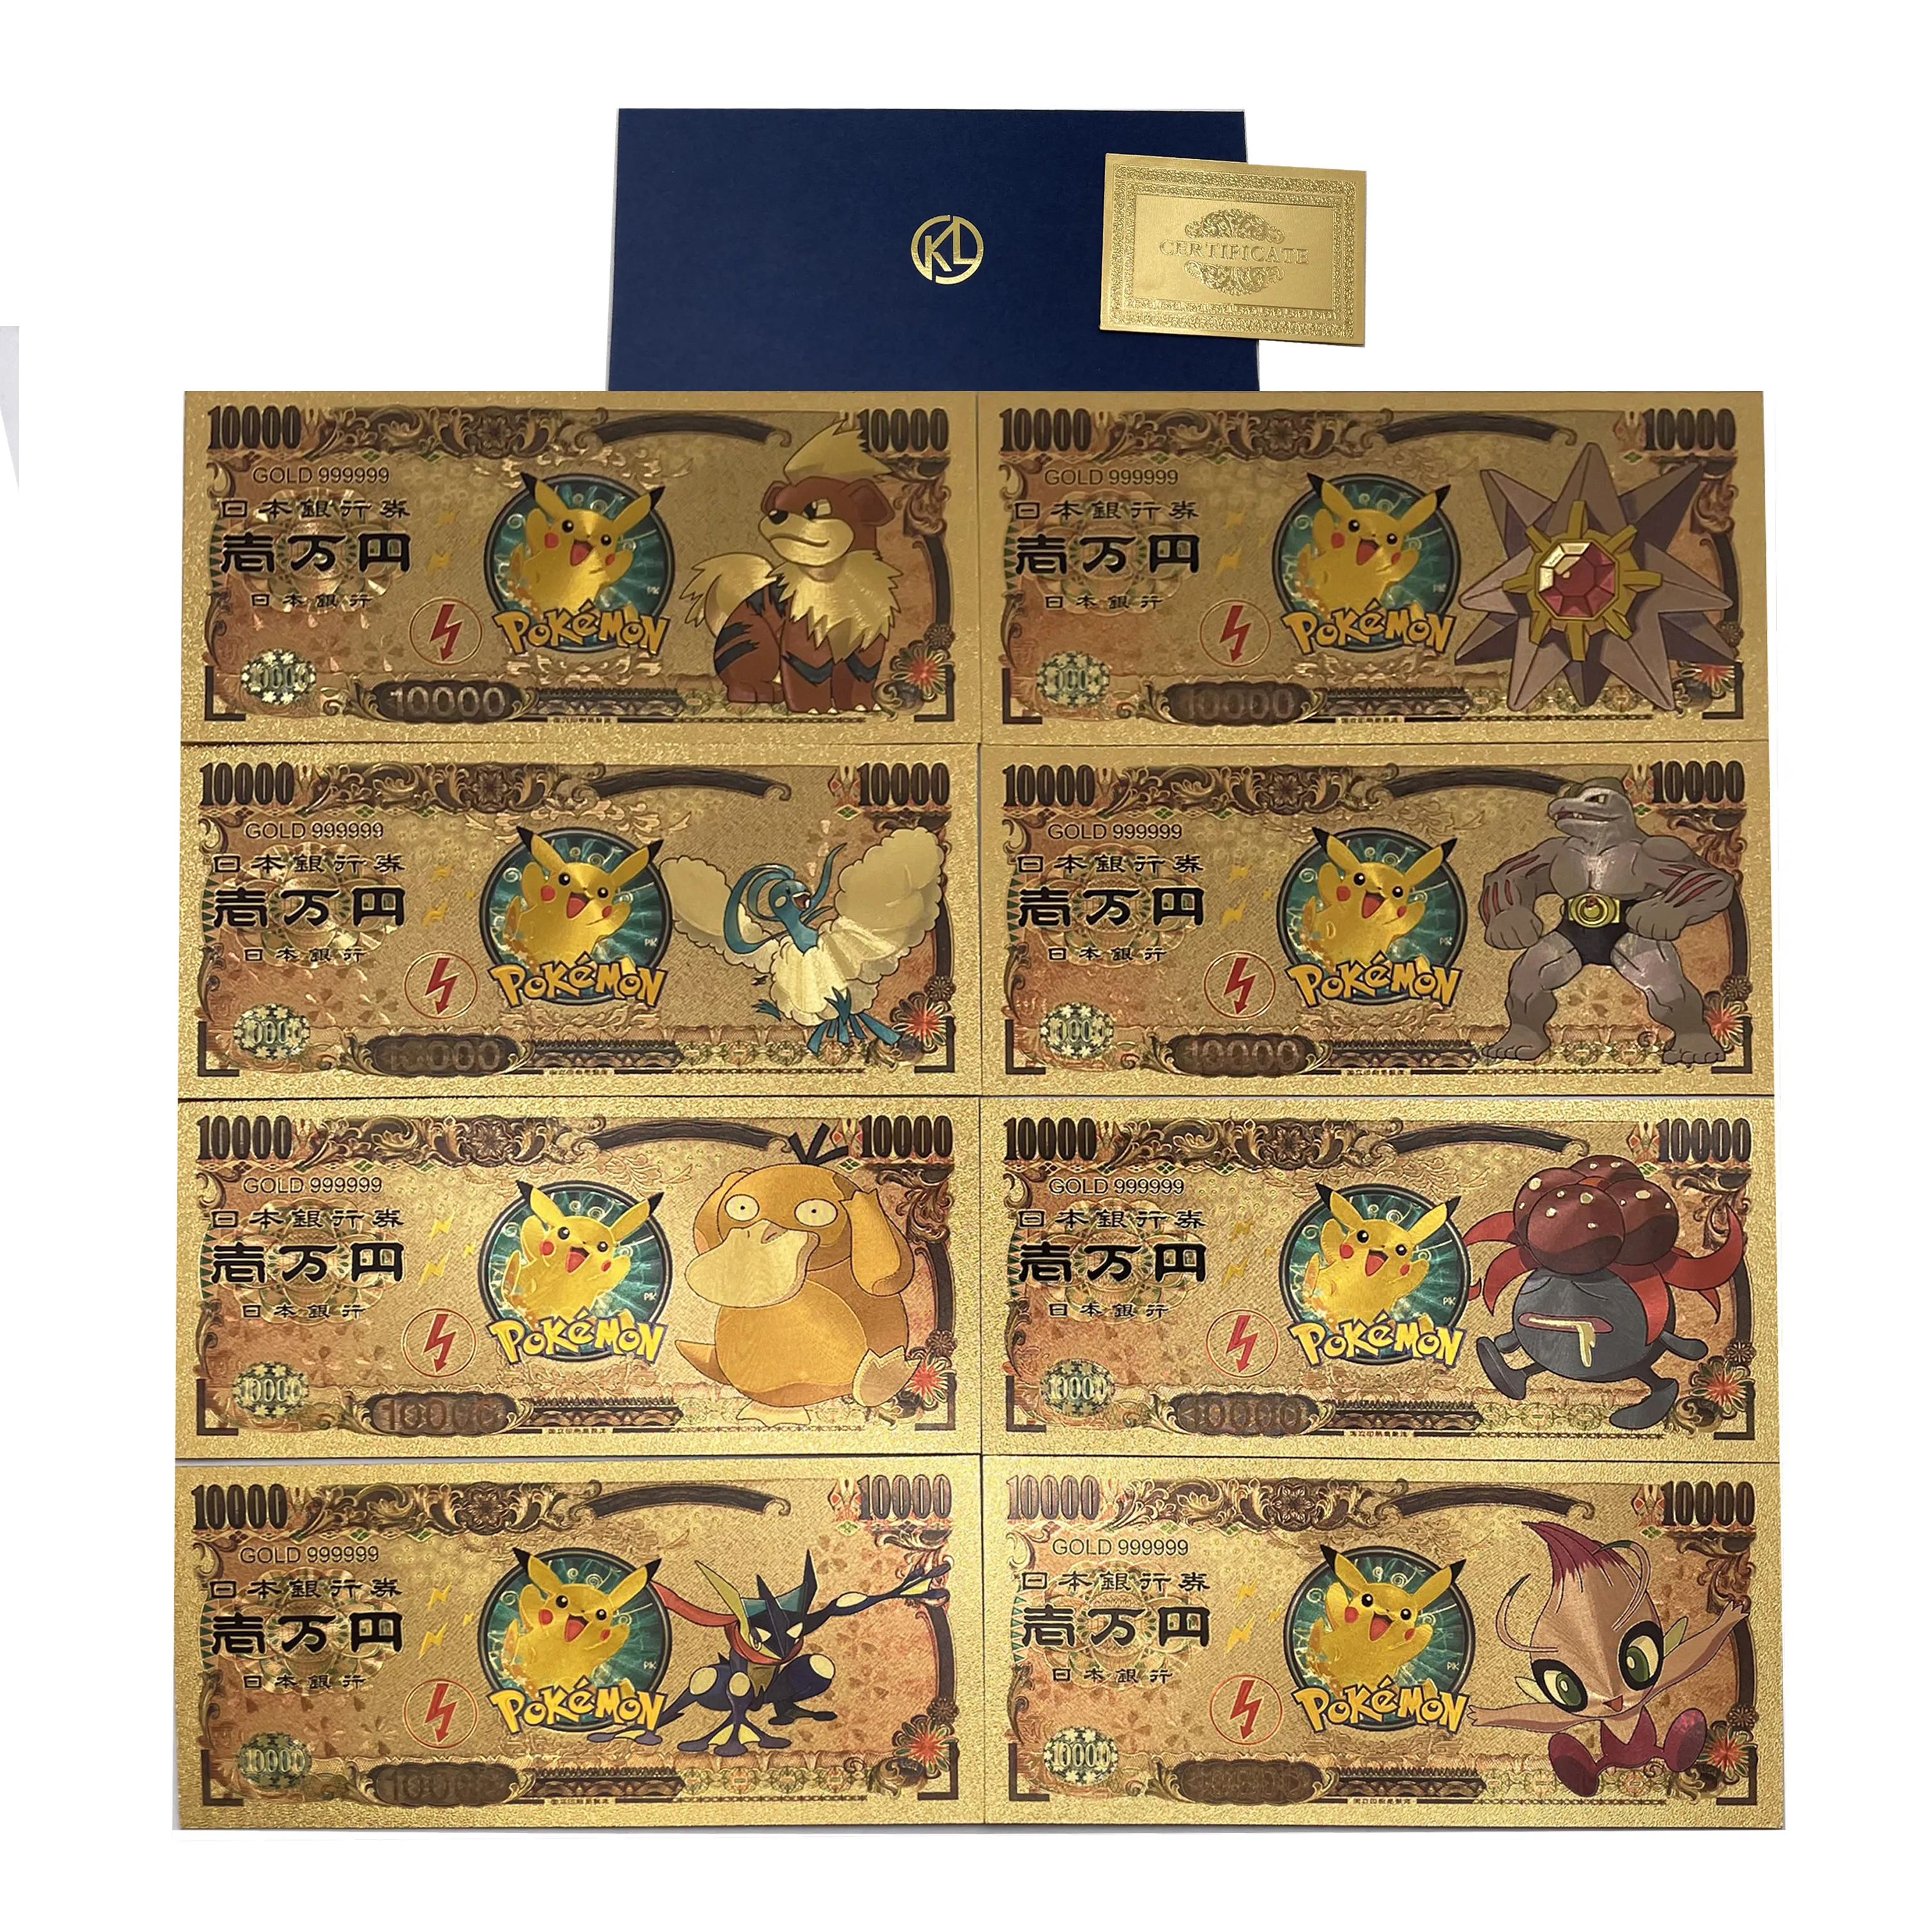 

New arrival Japanese Anime Poke-mon cards 10000 Yen Gold plastic banknote cute Pocket animal Psyduck for kids birthday gifts